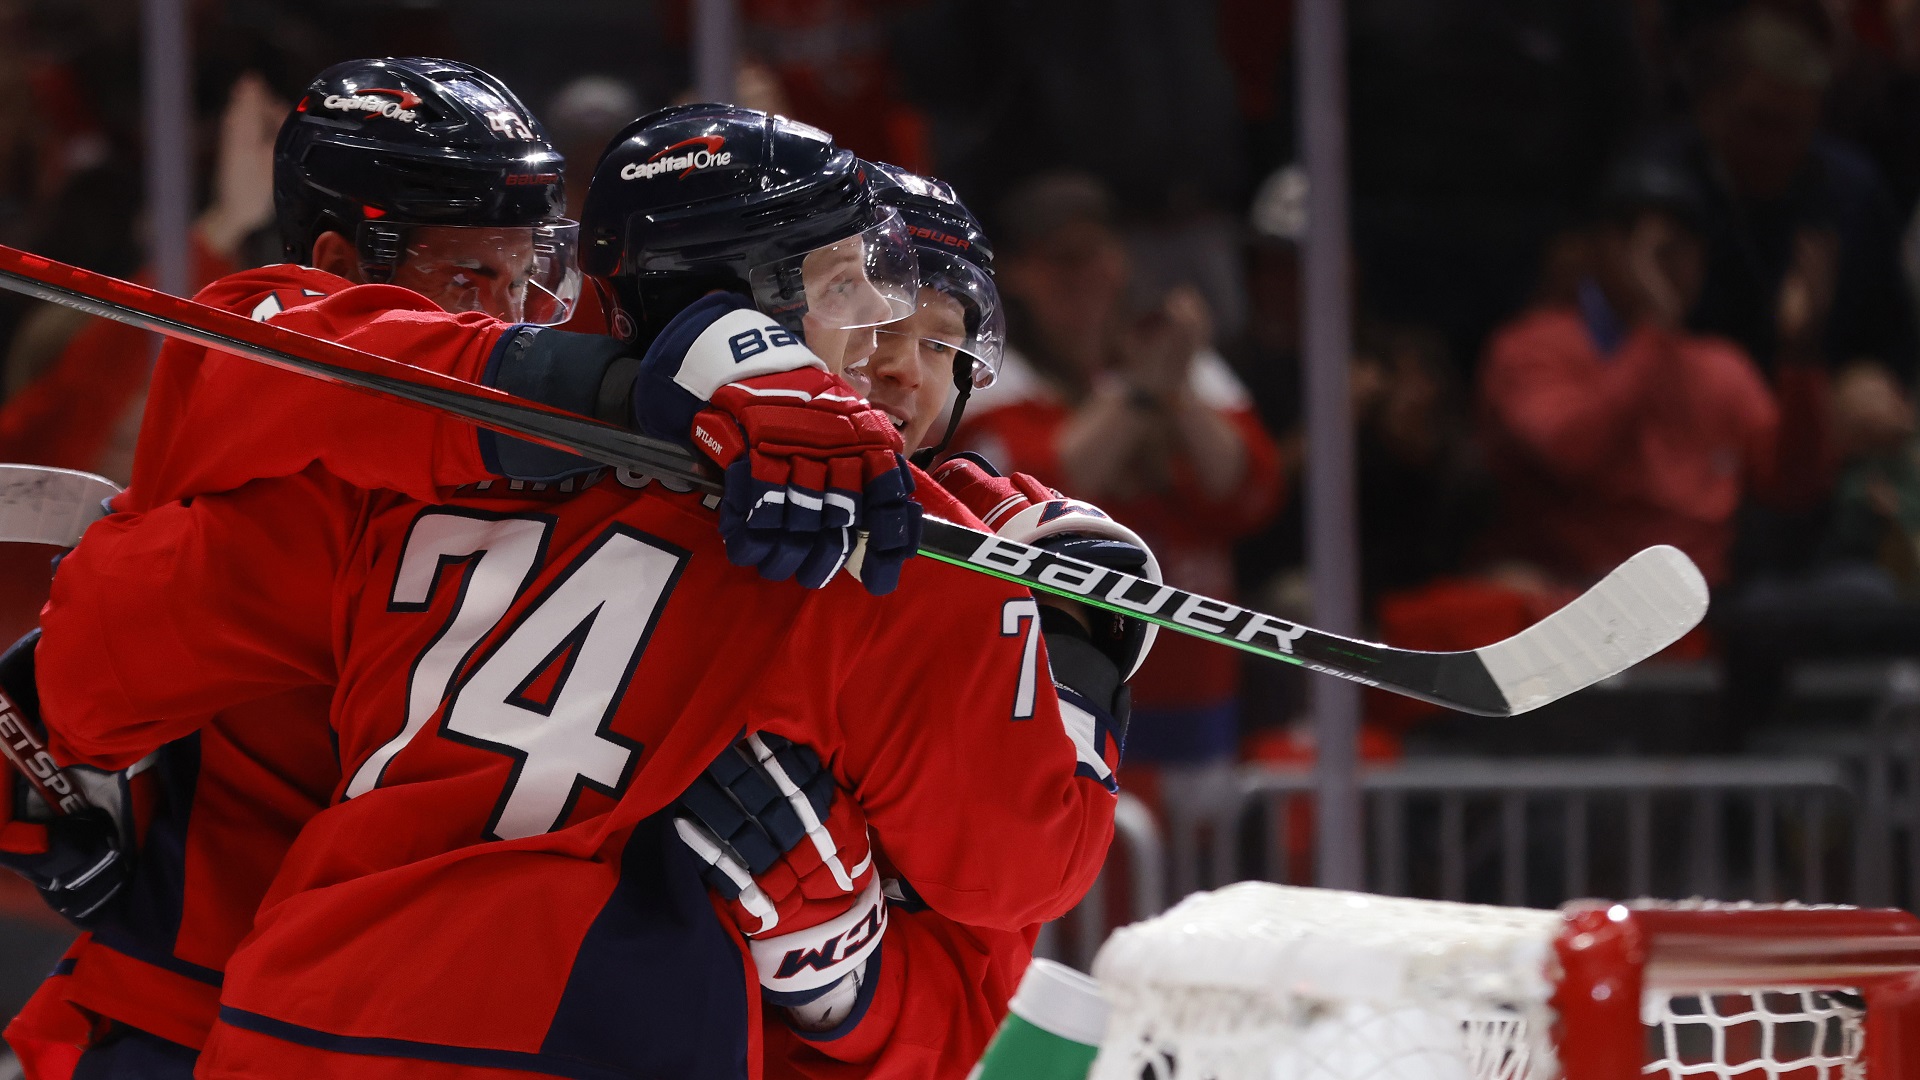 Capitals Down Ducks With a 4-3 Shootout Win